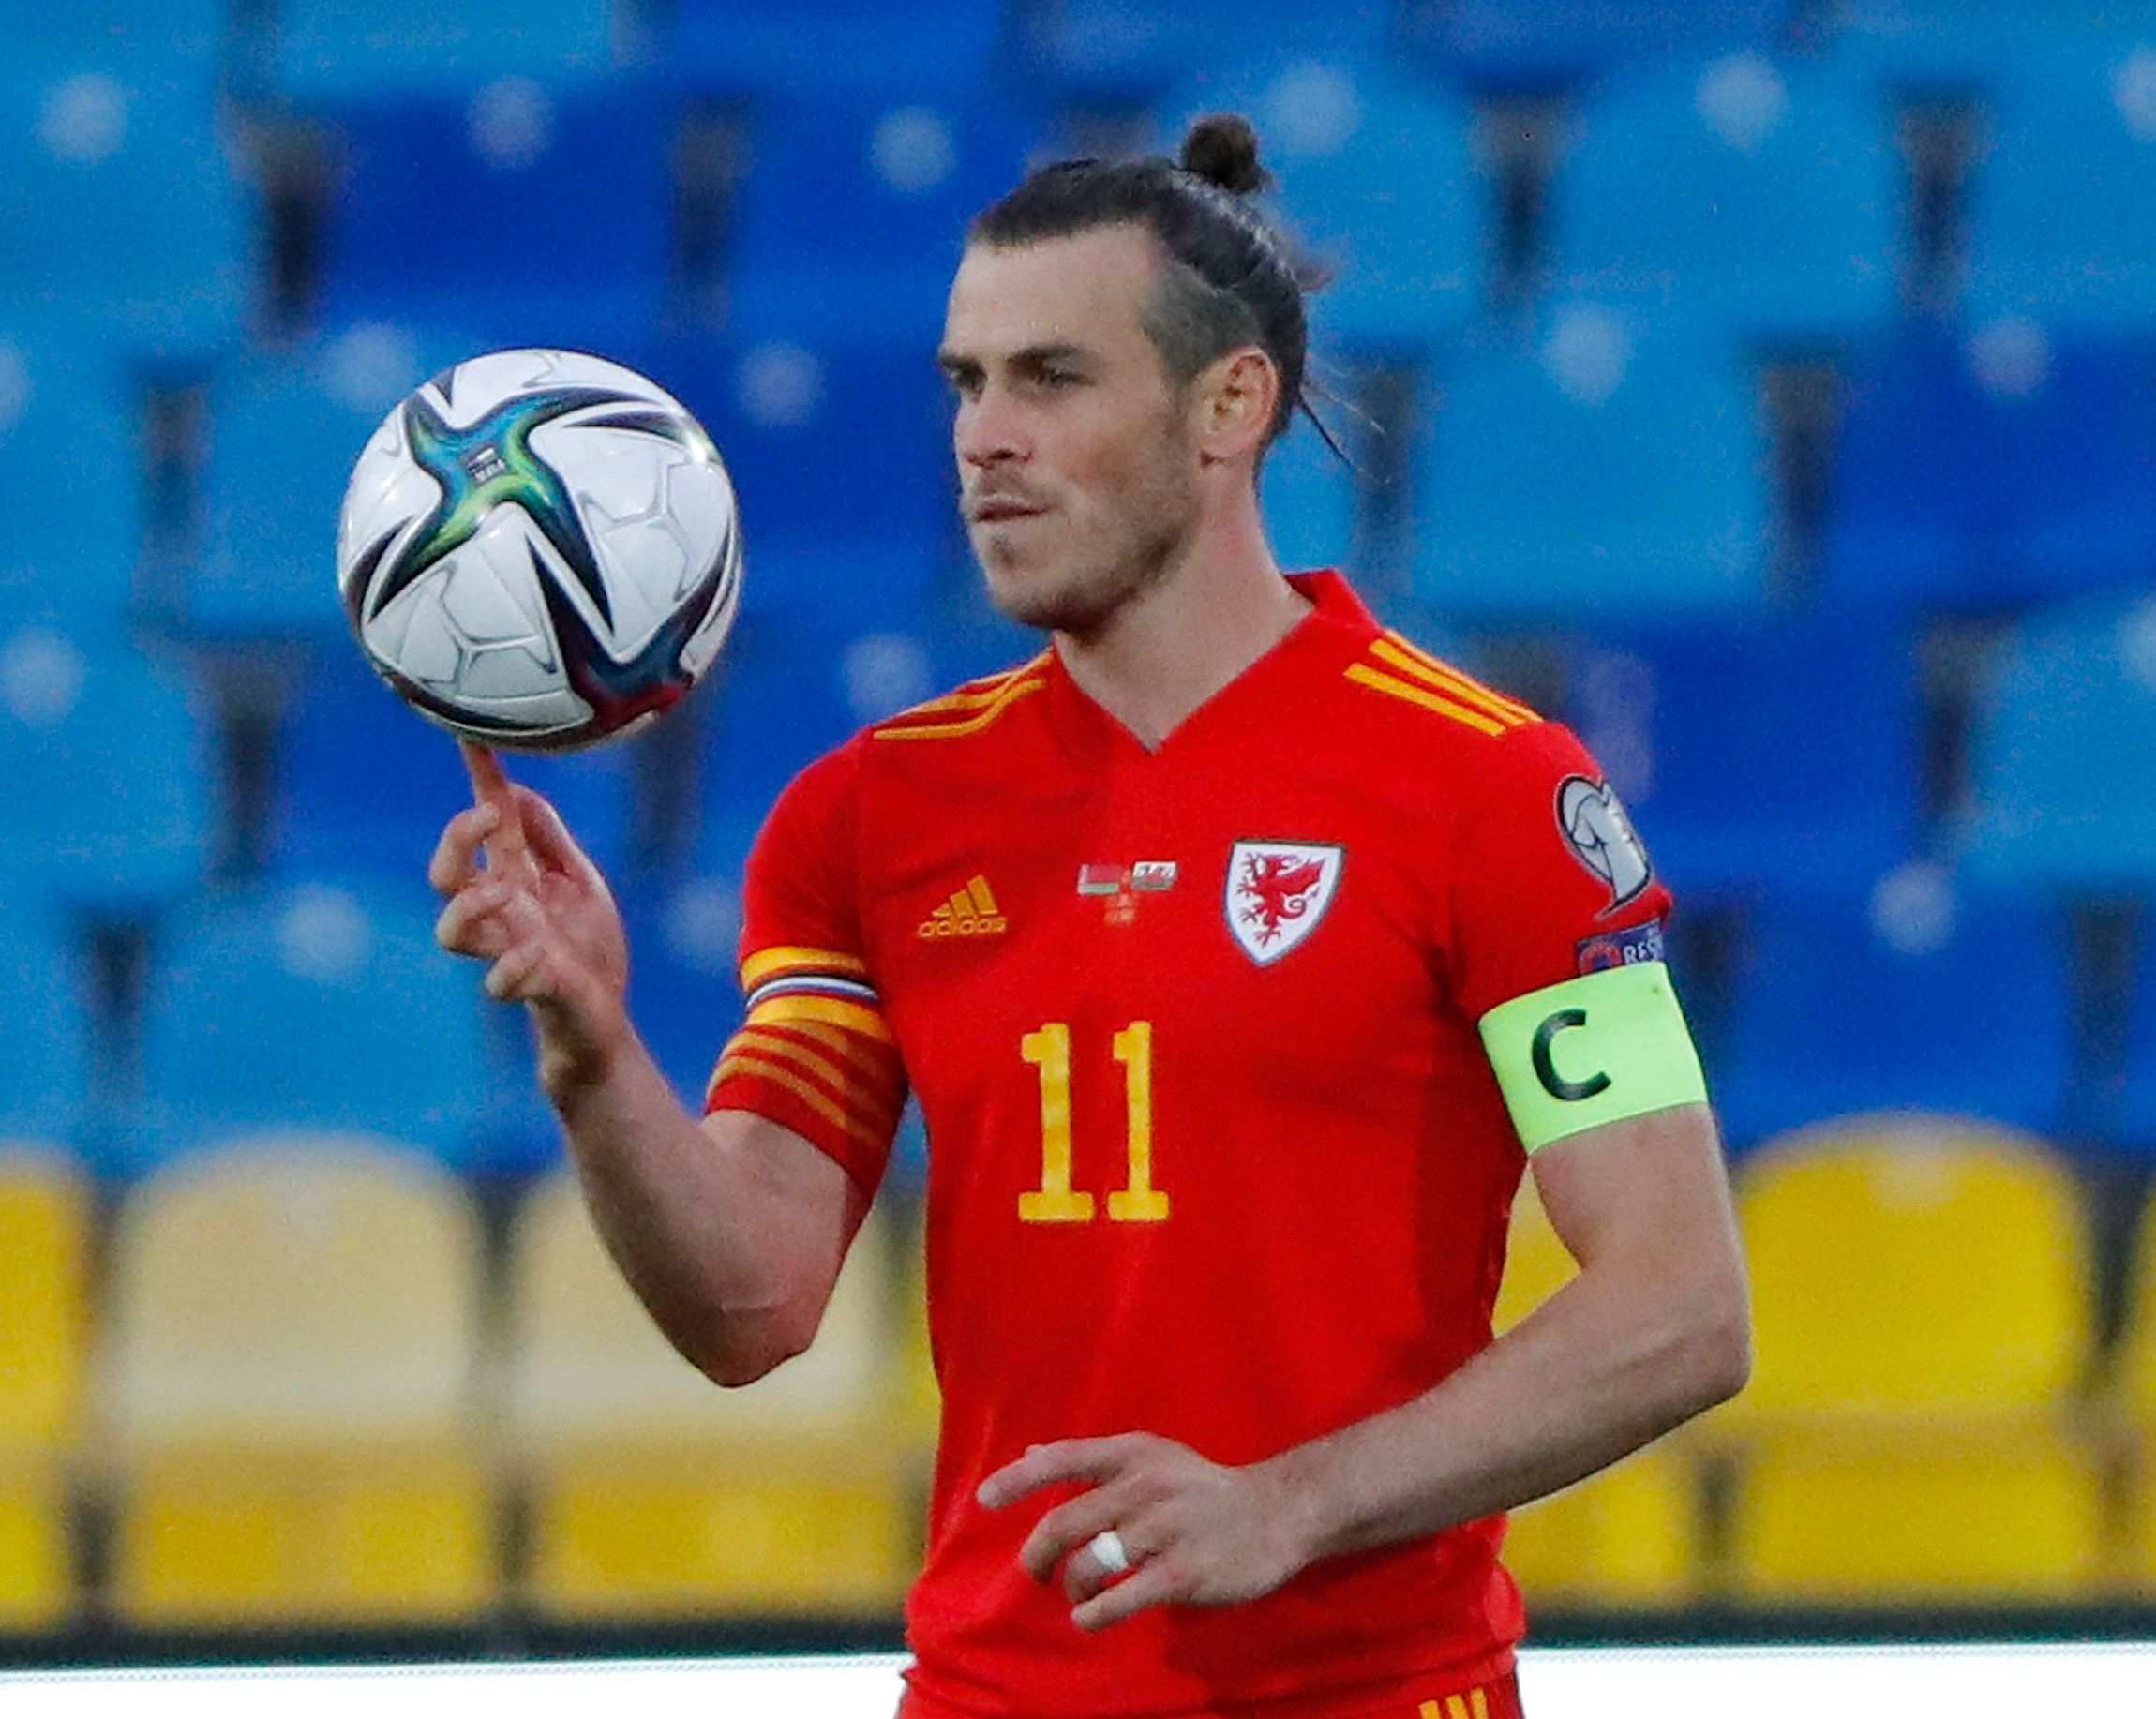 Soccer Football - World Cup - UEFA Qualifiers - Group E - Belarus v Wales - Central Stadium, Kazan, Russia - September 5, 2021 Wales' Gareth Bale holds the match ball after scoring their third goal to complete his hat-trick REUTERS/Evgenia Novozhenina